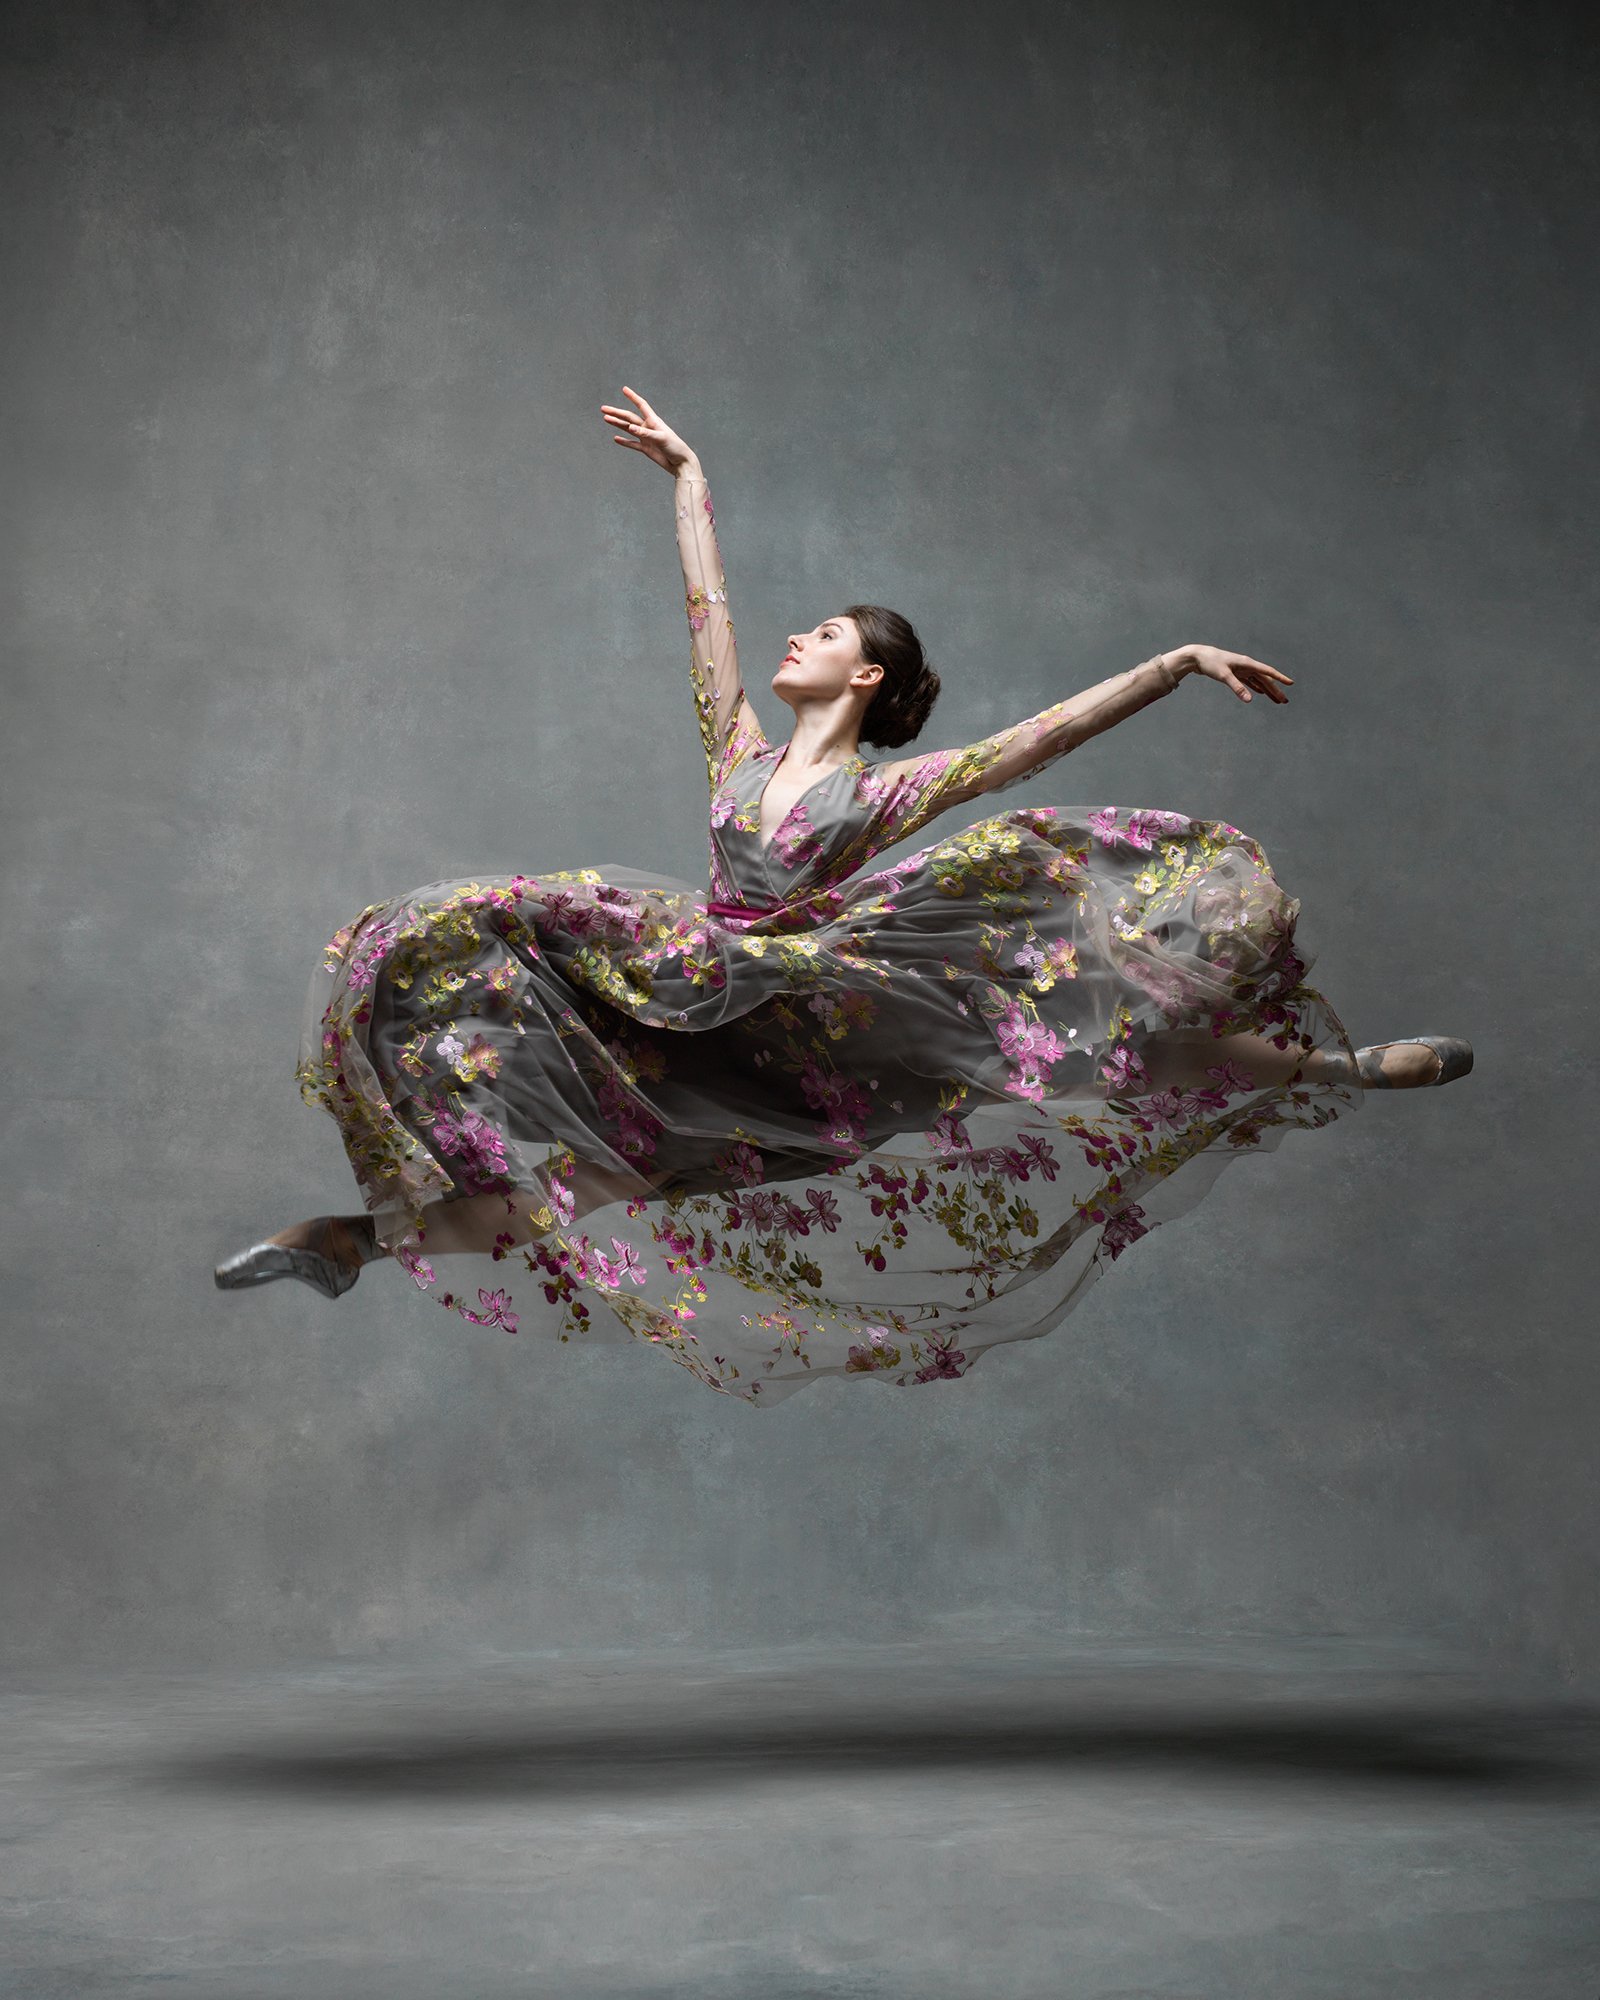 Collaborating with Dancers in the Studio as a Photographer